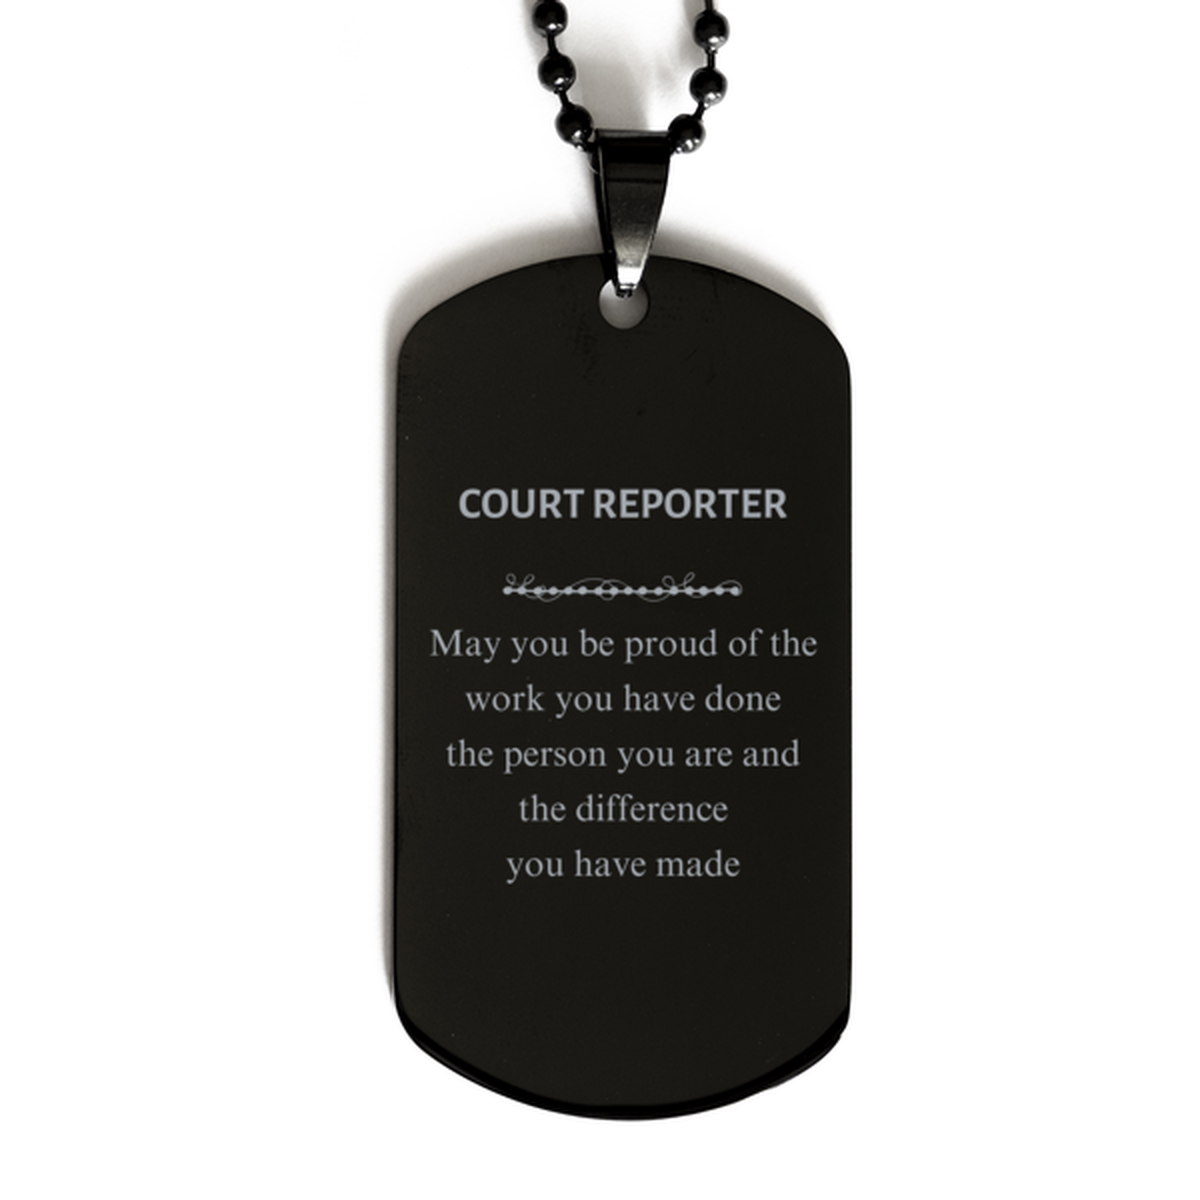 Court Reporter May you be proud of the work you have done, Retirement Court Reporter Black Dog Tag for Colleague Appreciation Gifts Amazing for Court Reporter